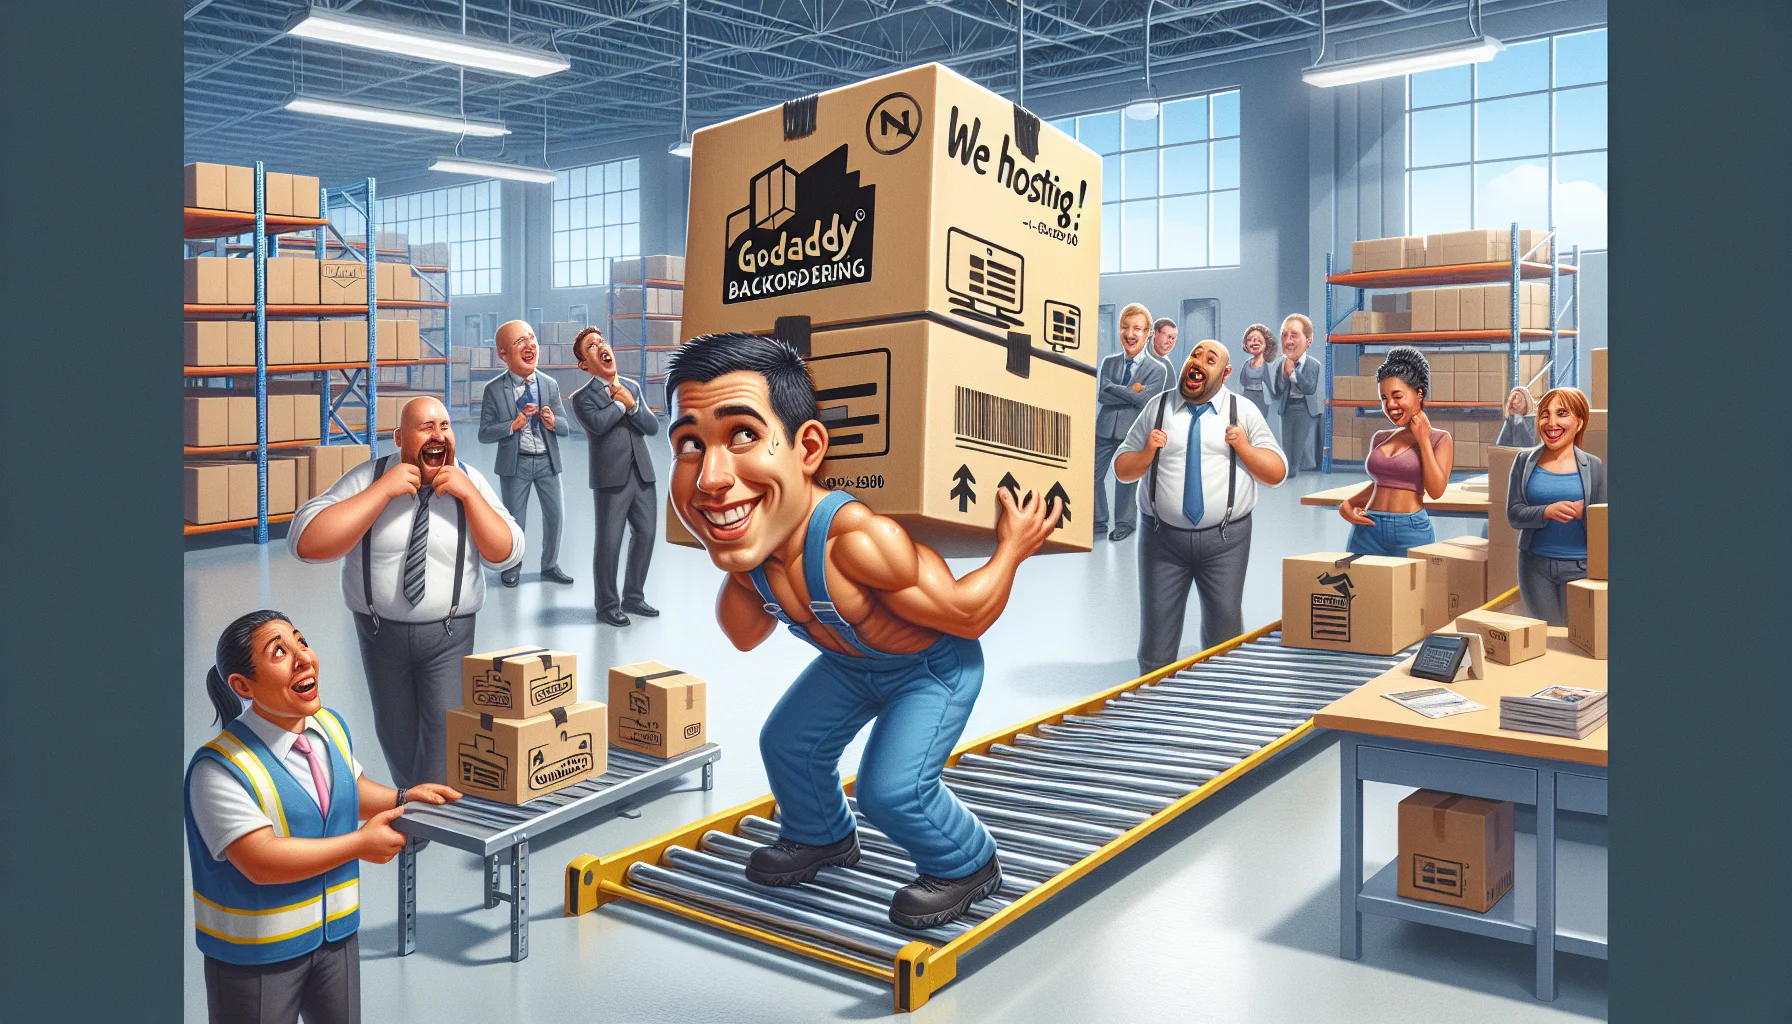 Create a humorous, realistic image of an office setting where web hosting services are depicted as physical objects on a warehouse shelf. Include a conveyor belt carrying a box labeled 'GoDaddy Backordering', which is about to be installed on a shelf. The box appears surprisingly heavy, making the worker, a Hispanic man in his 30s, sweat. Around the room, other workers of various descents and genders are chuckling at the sight, some playfully pretending to back away from the 'heavy' box. The scene conveys lighthearted fun and excitement around the concept of web hosting.